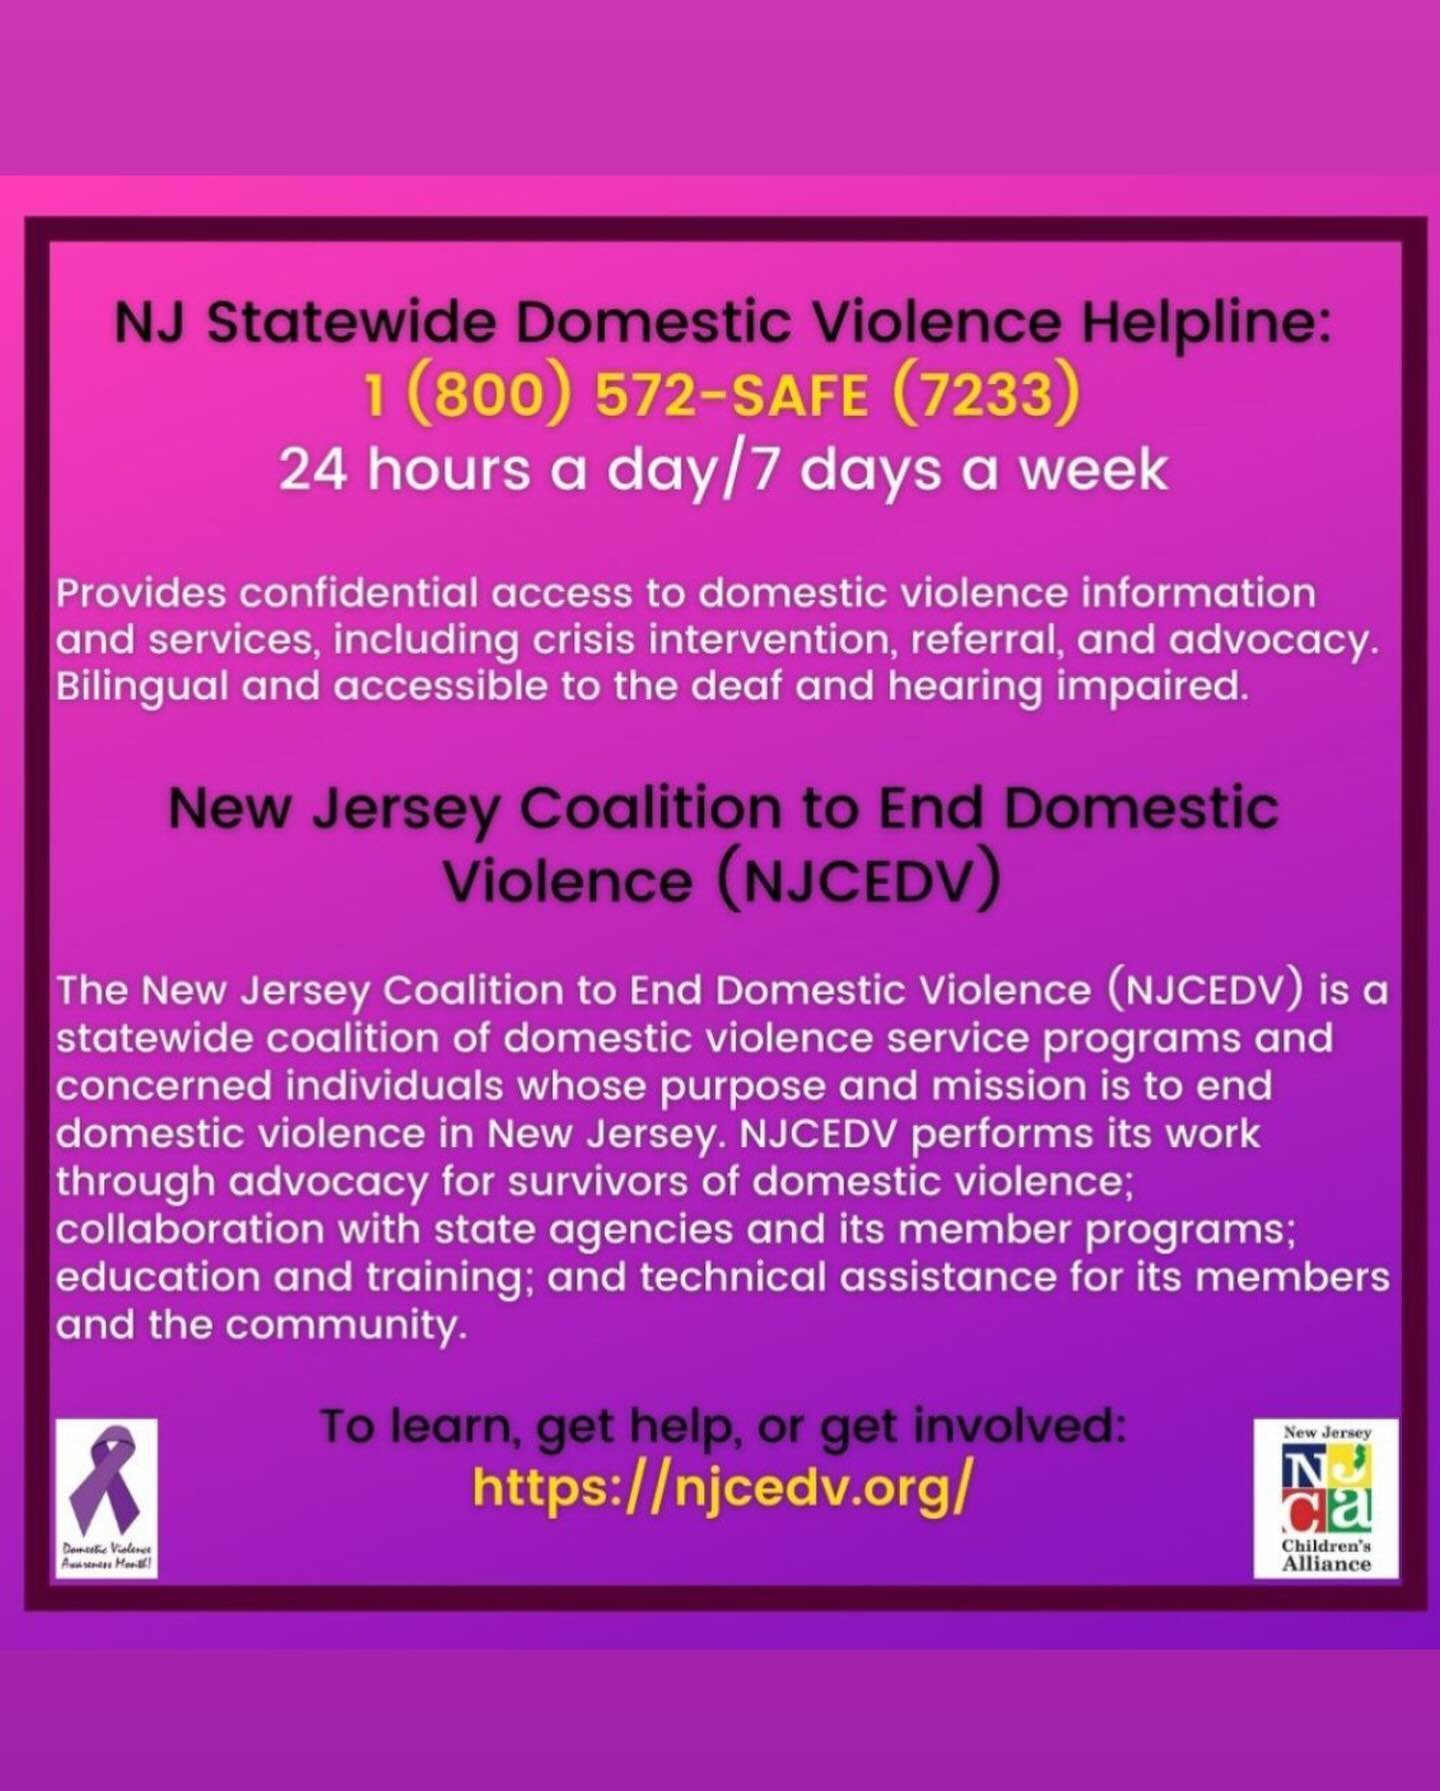 💜 DOMESTIC VIOLENCE &amp; ABUSE RESOURCES 💜

In light of today's revelations, I'm going to leave this here. DV is no joke. If you need help, there are first responders, professionals, and agencies that can help. 

SWIPE 👈🏾 for information. Forwar